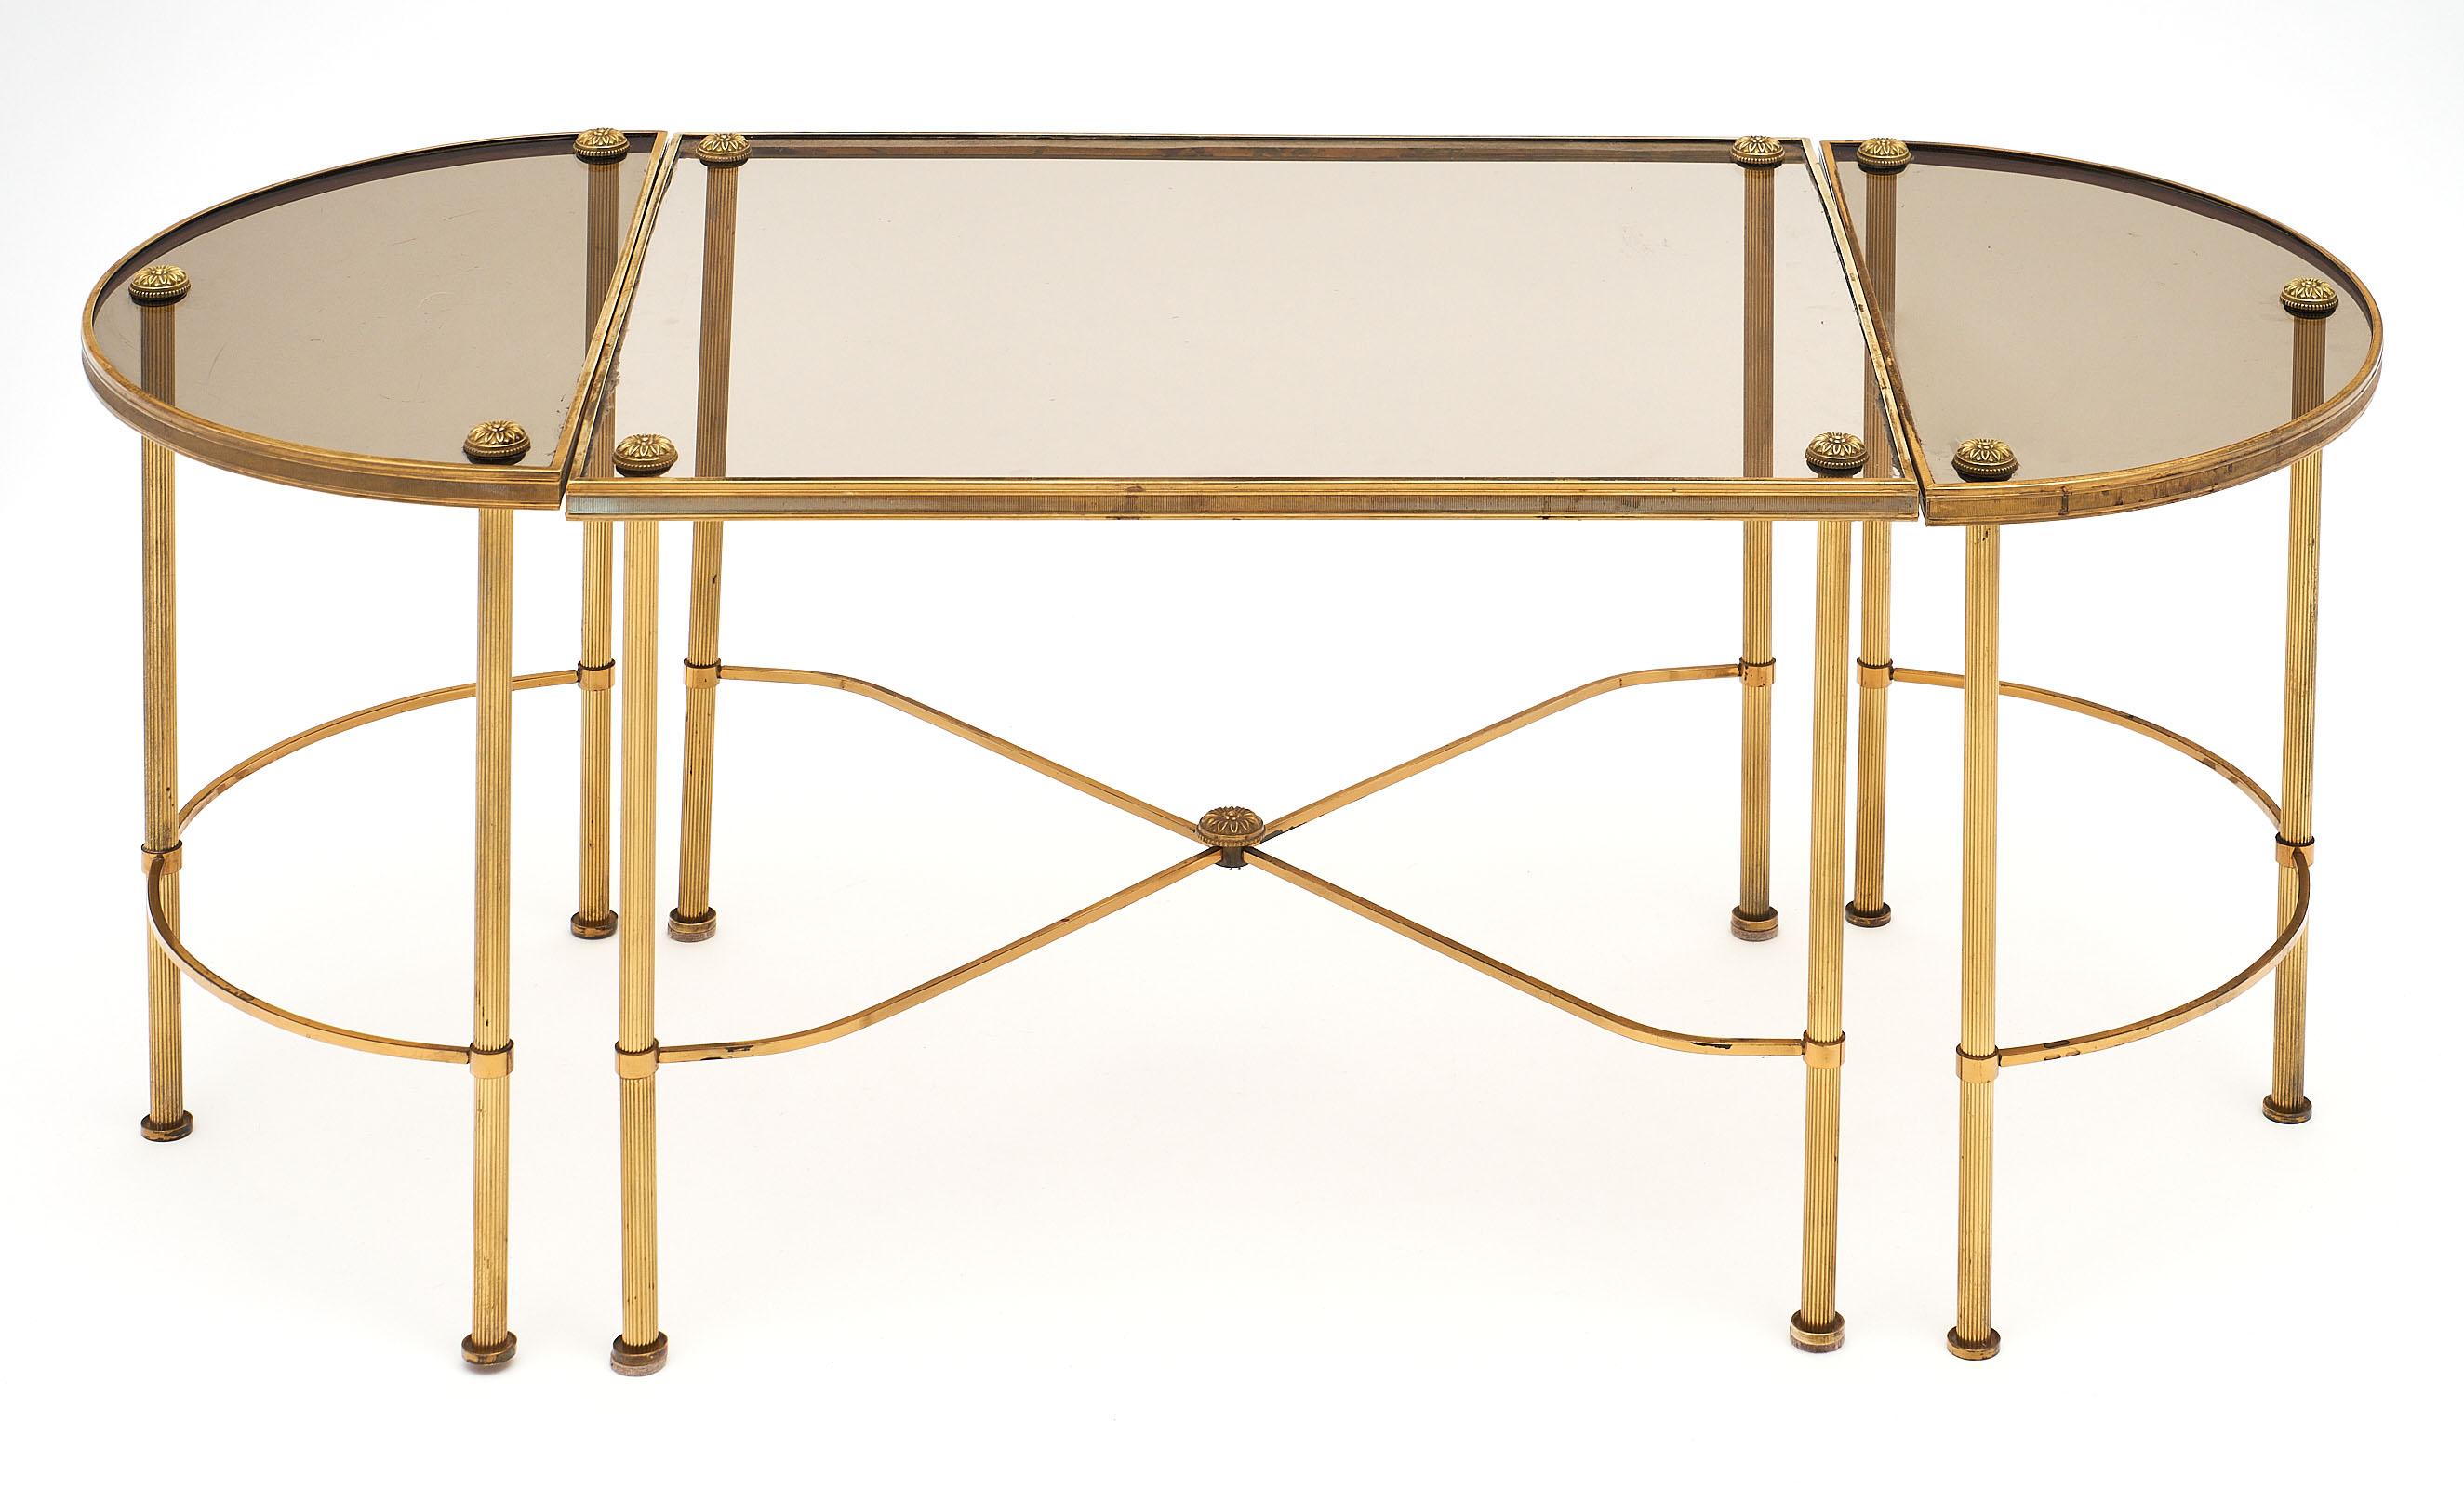 Maison Baguès style vintage coffee table from France. This Art Deco period piece has a brass structure and smoked glass, featuring a square table with two half moon side tables on each end. The curved stretchers, finely cast finials, and perfect